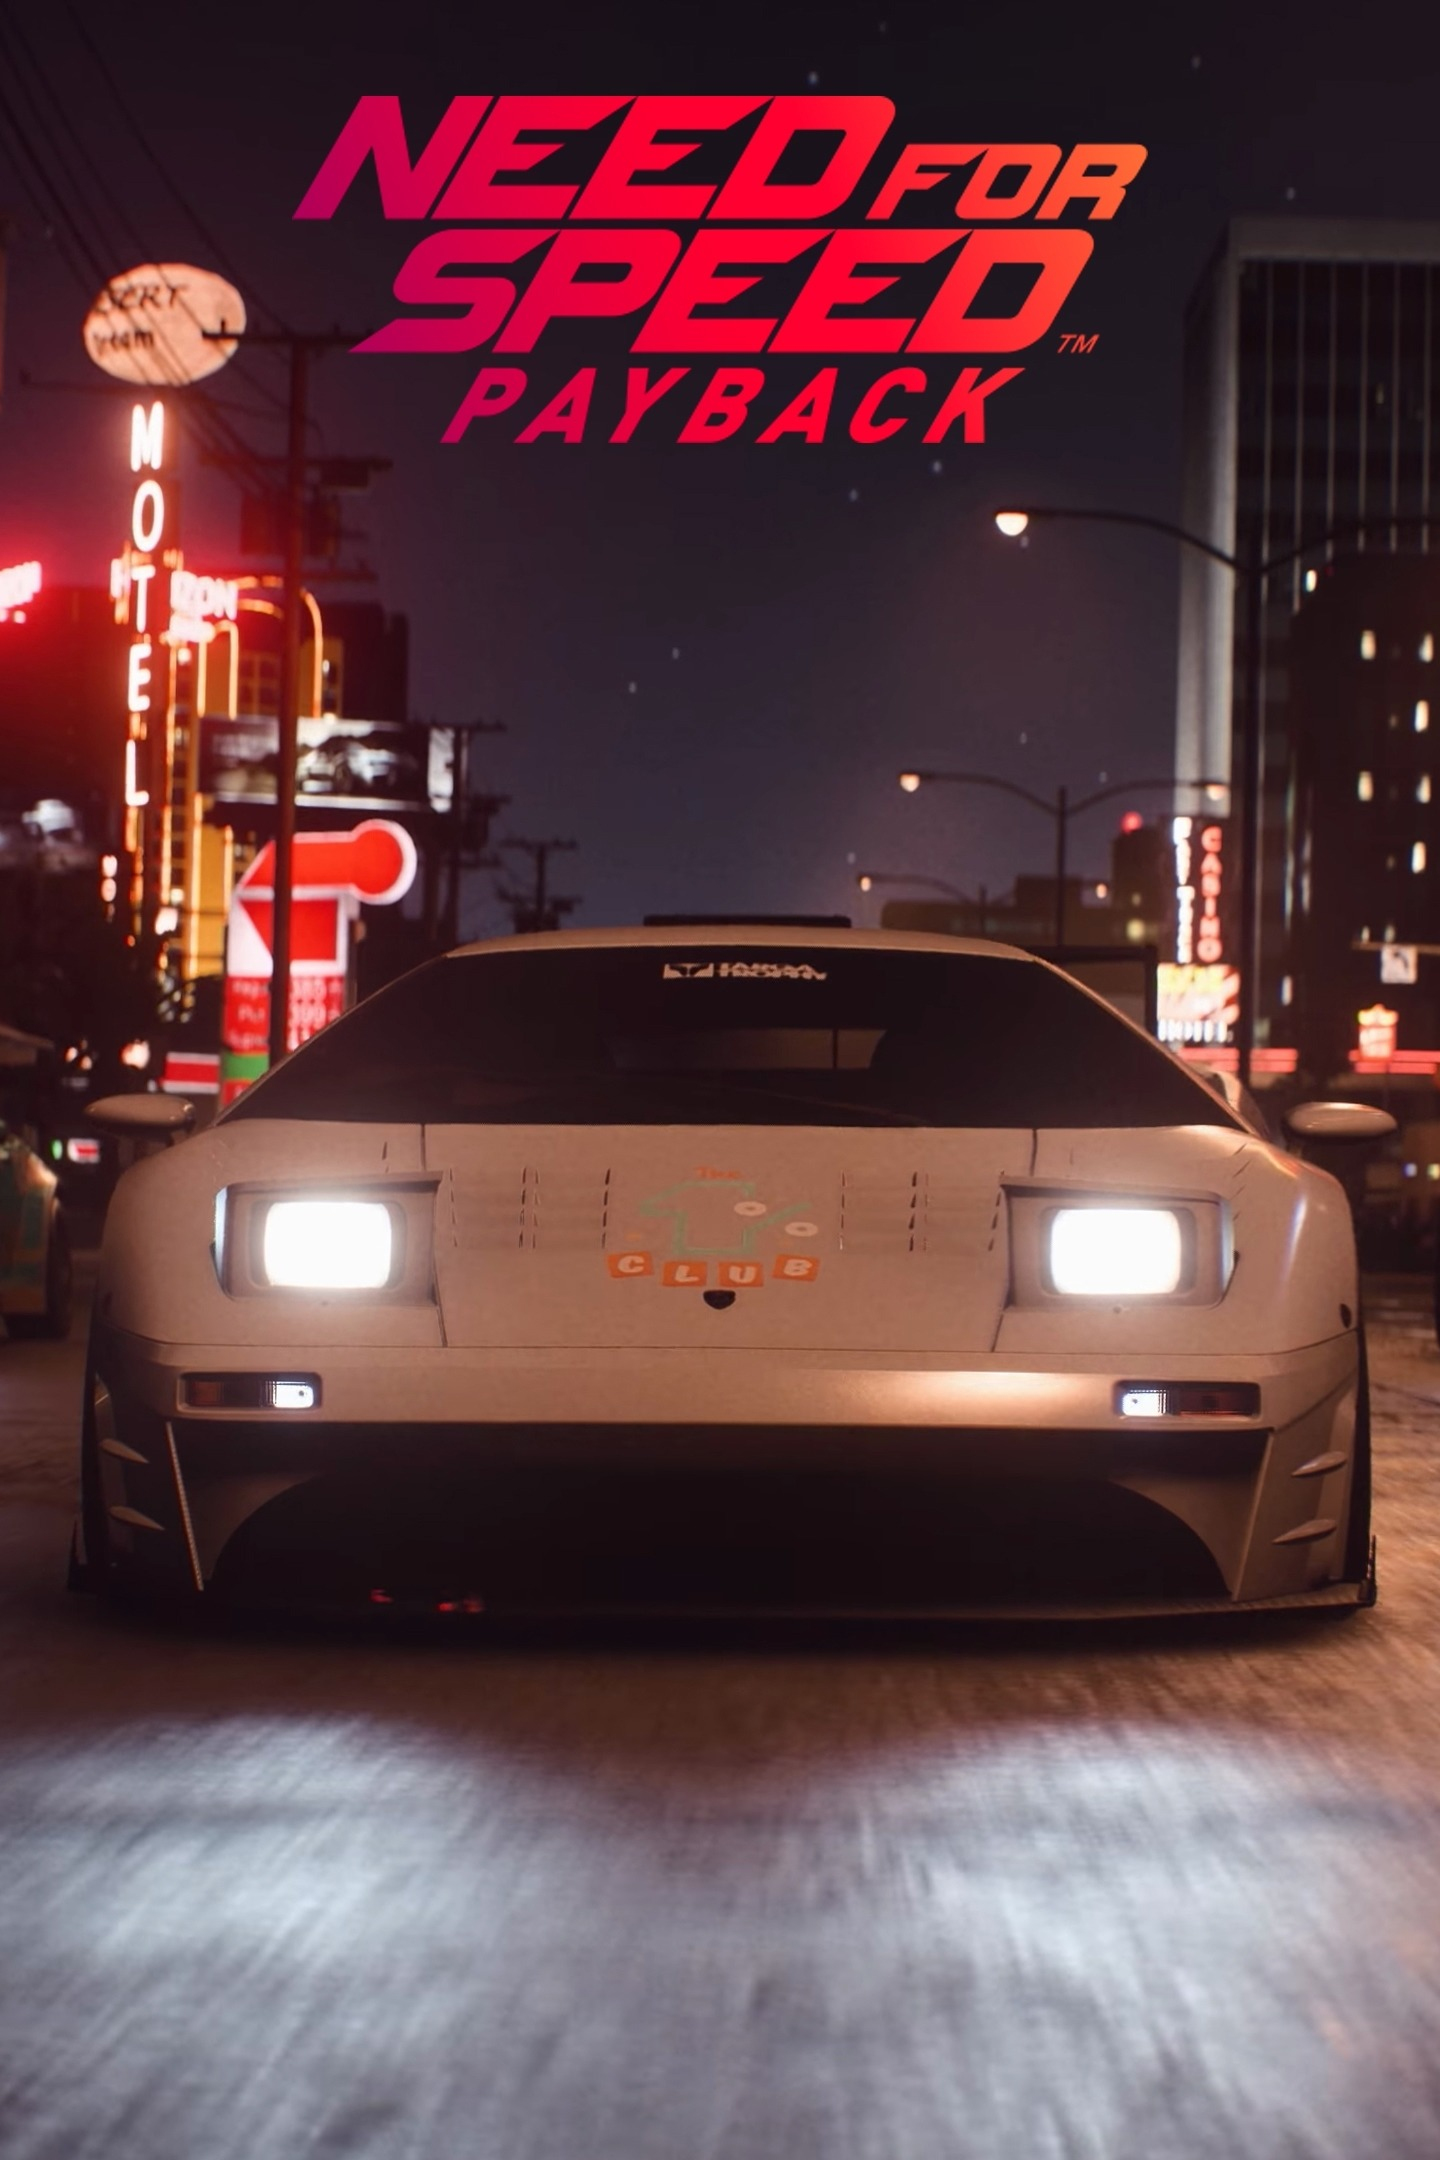 Need for speed payback download